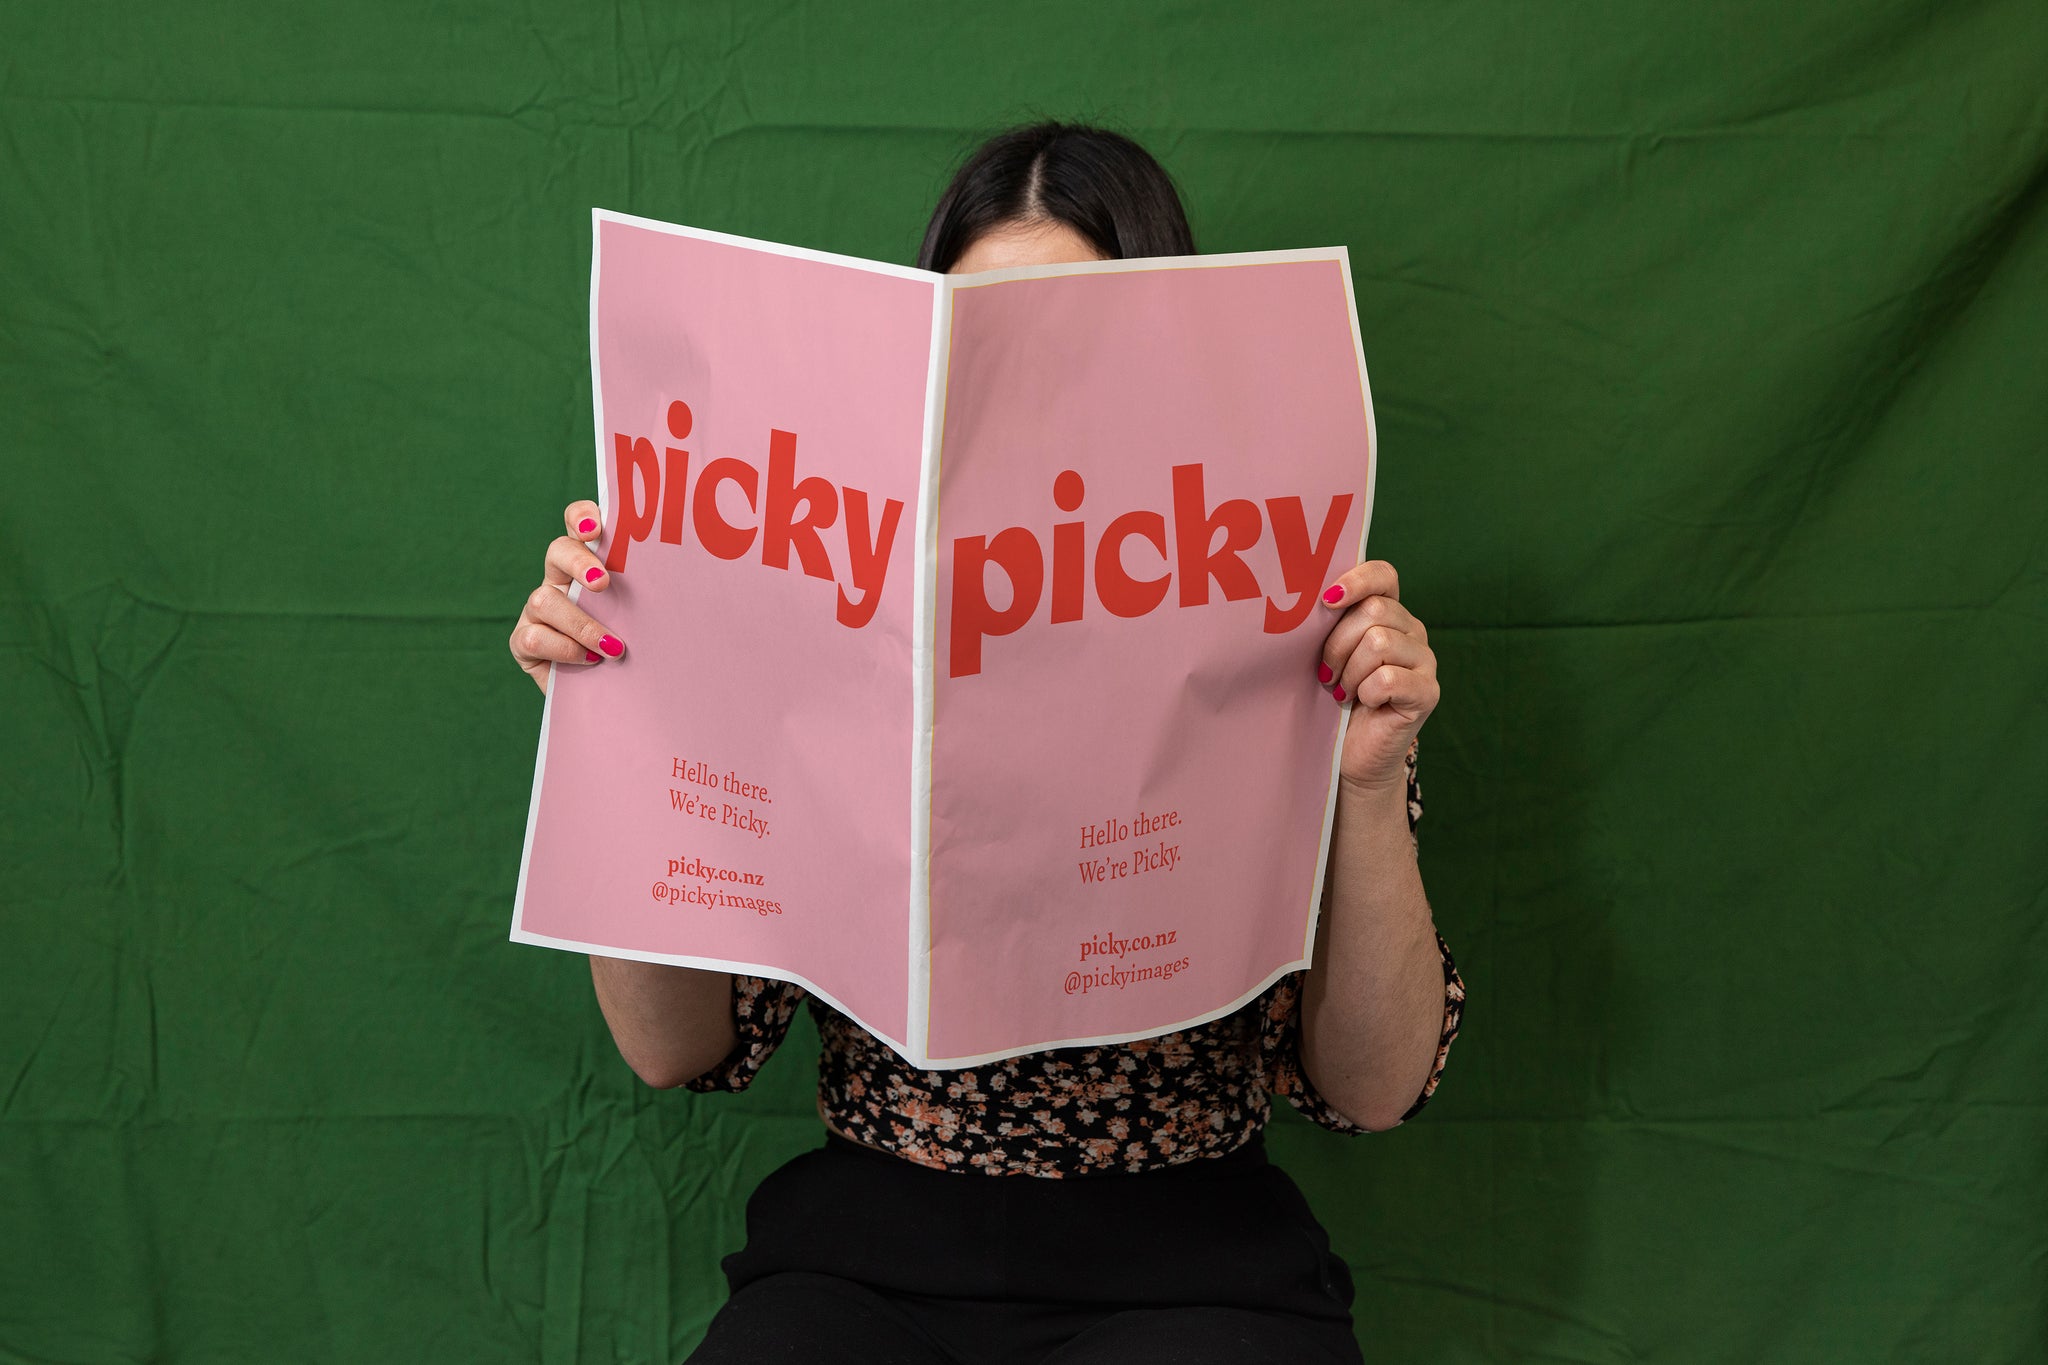 Landscape close-up of a woman in pink nail polish reading a large paper document in front of a green backdrop; it is pink with a large red picky logo and mock-up advertisement.